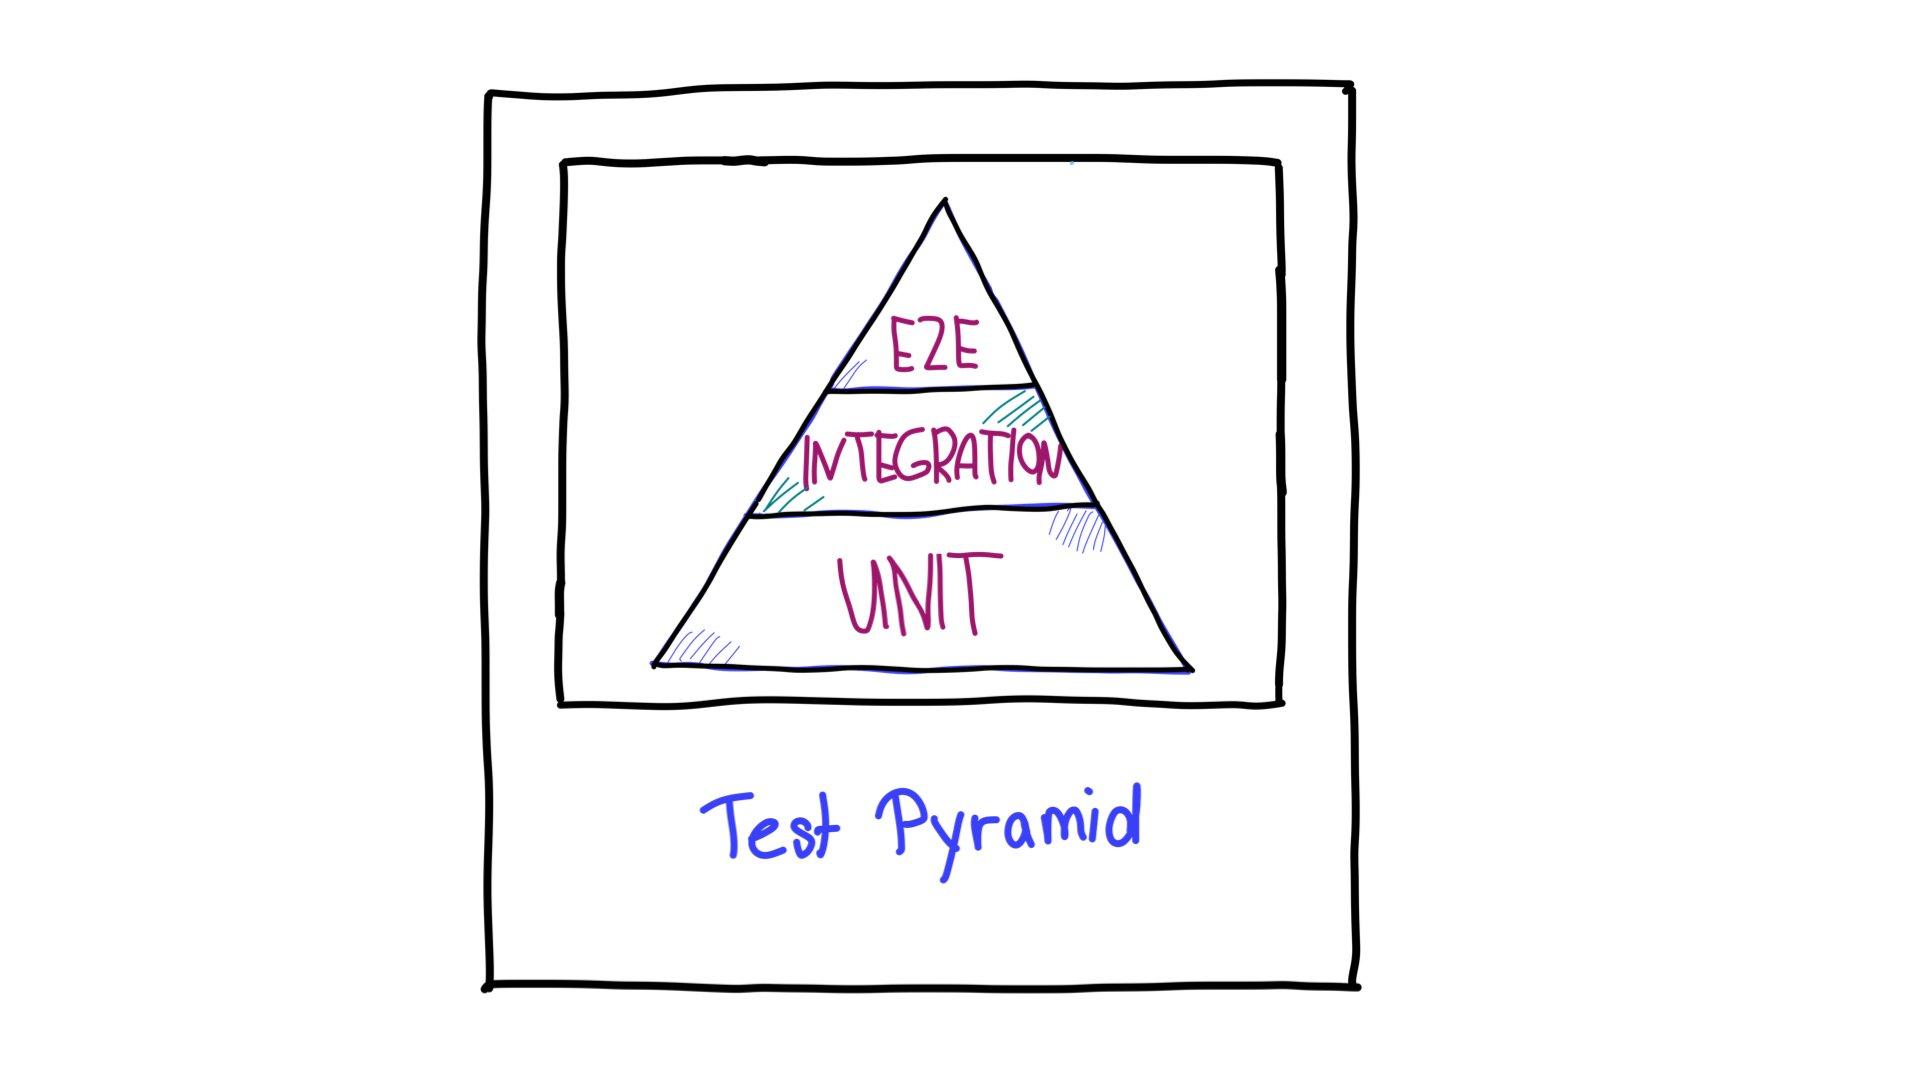 The testing pyramid,
    with end-to-end (E2E) tests at the top, integration tests in the middle, and
    unit tests at the bottom.